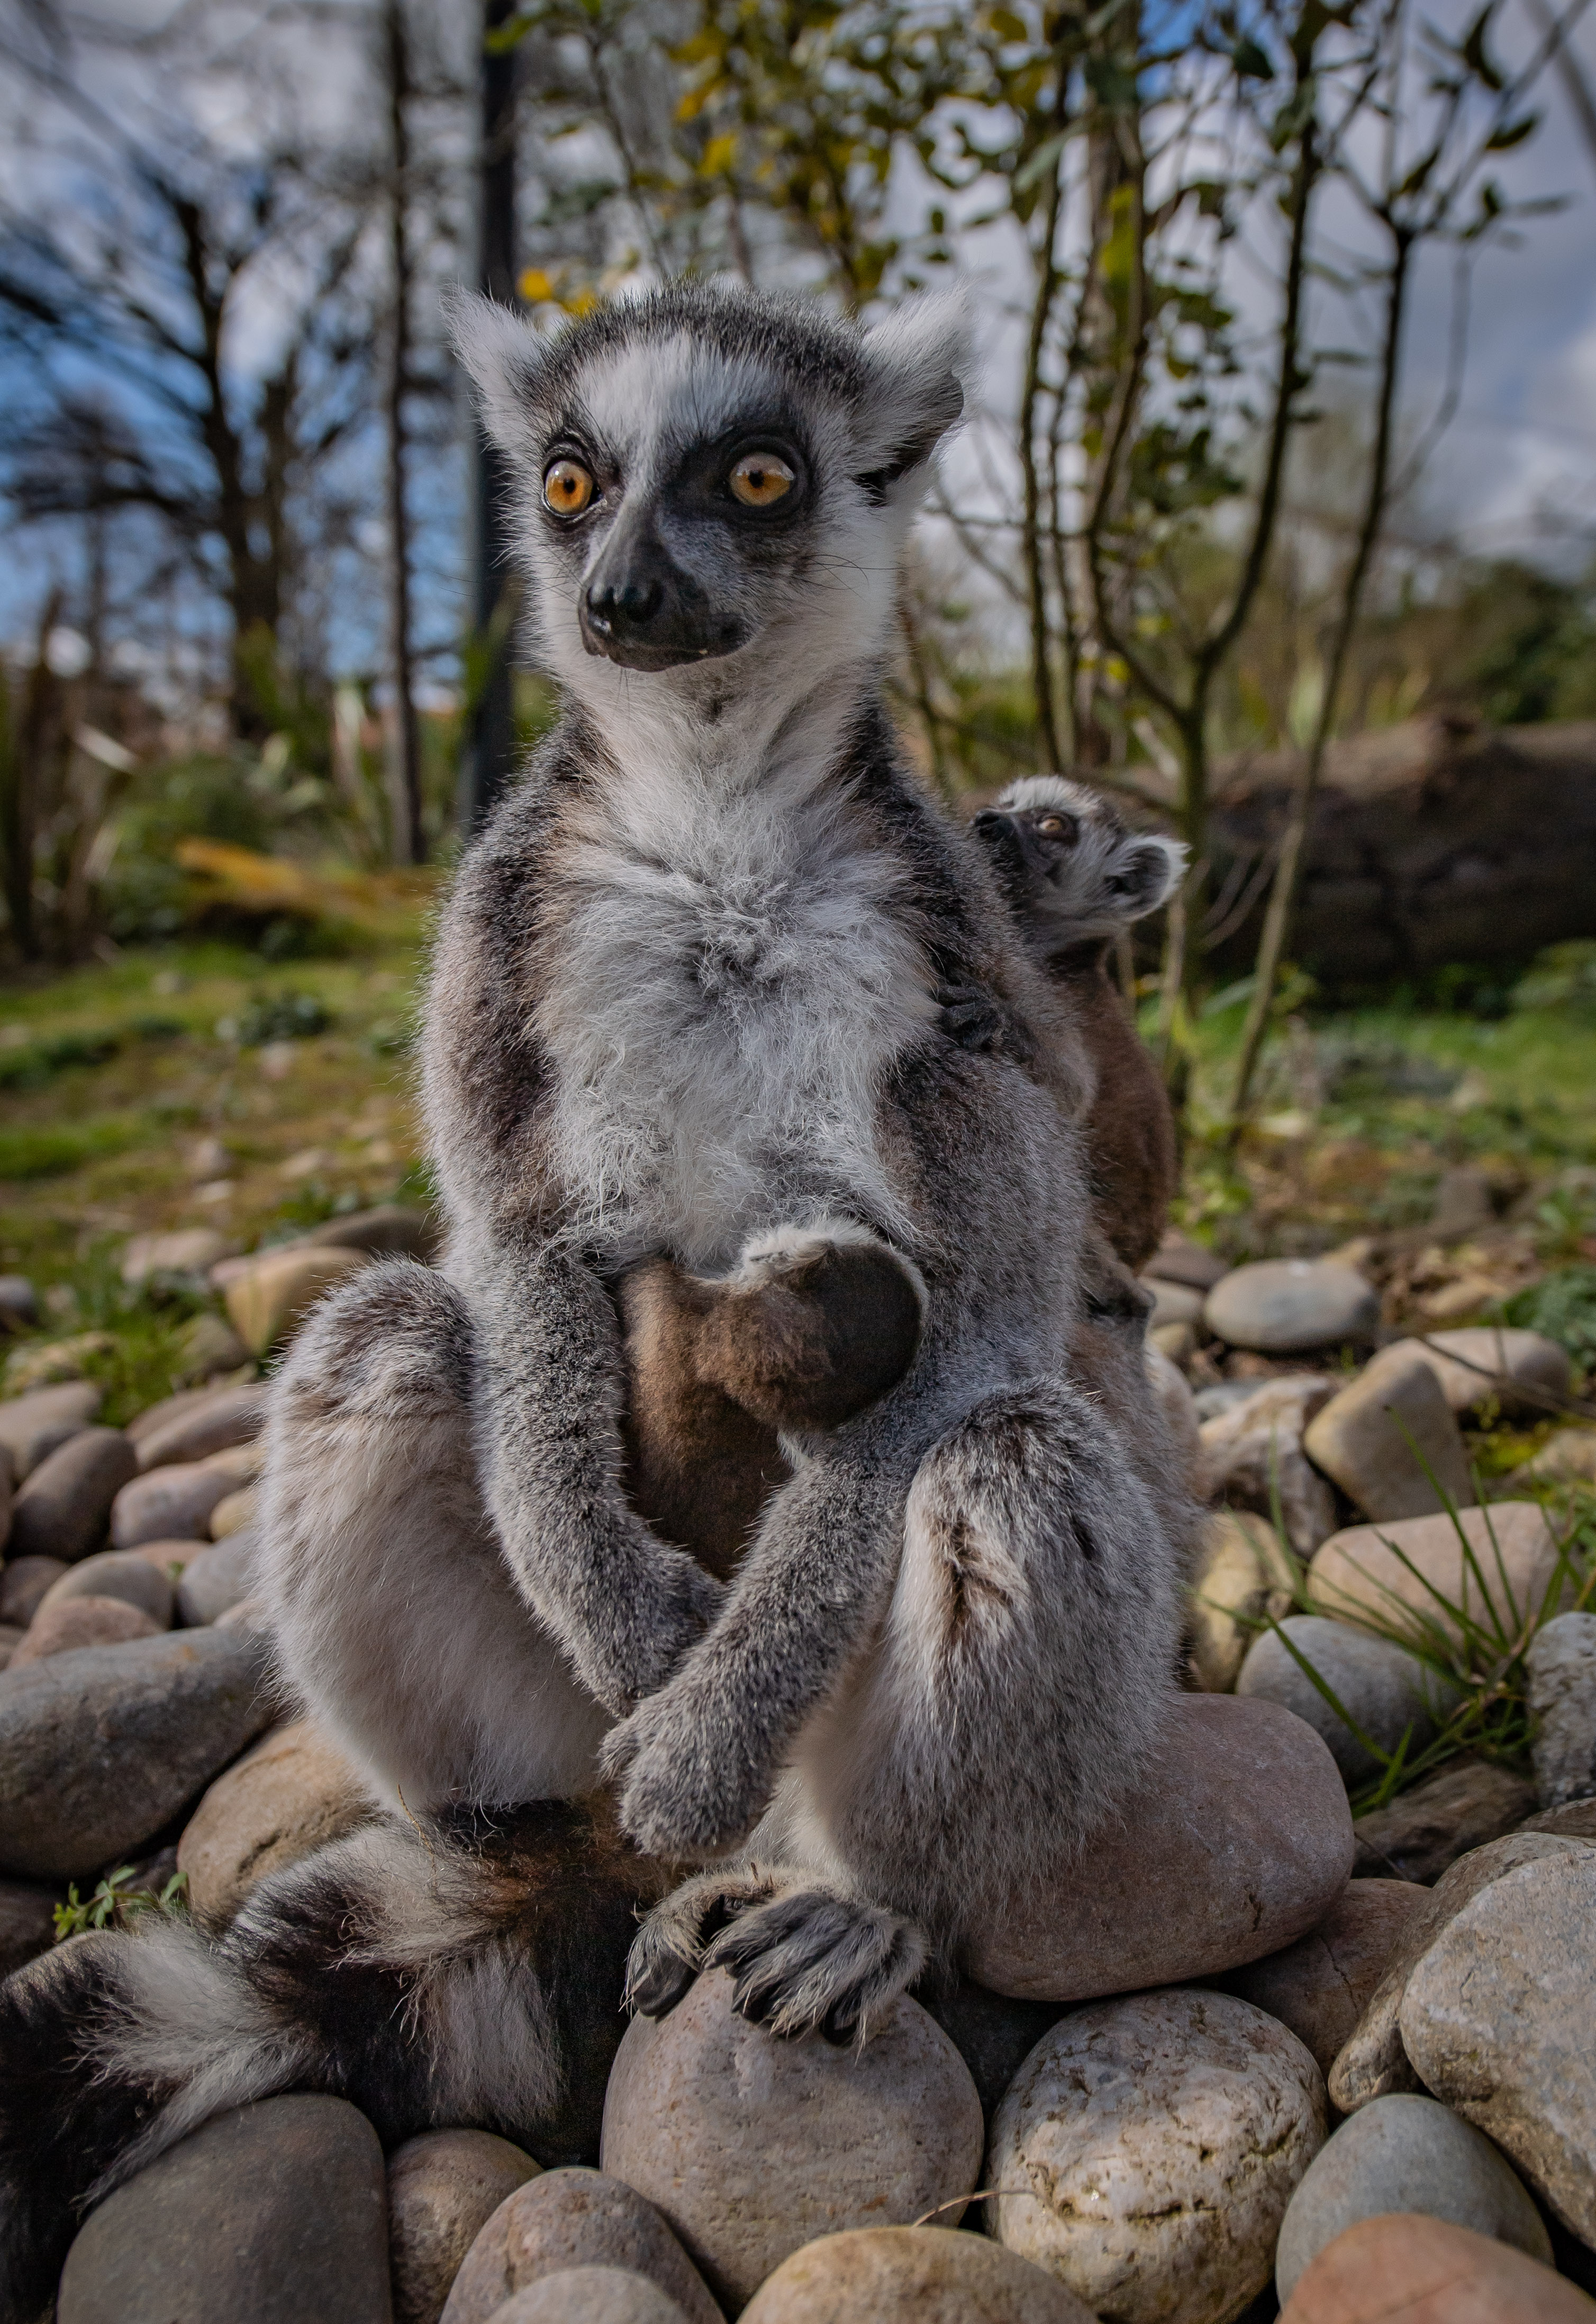 Twin ring-tailed lemurs cling to their mum